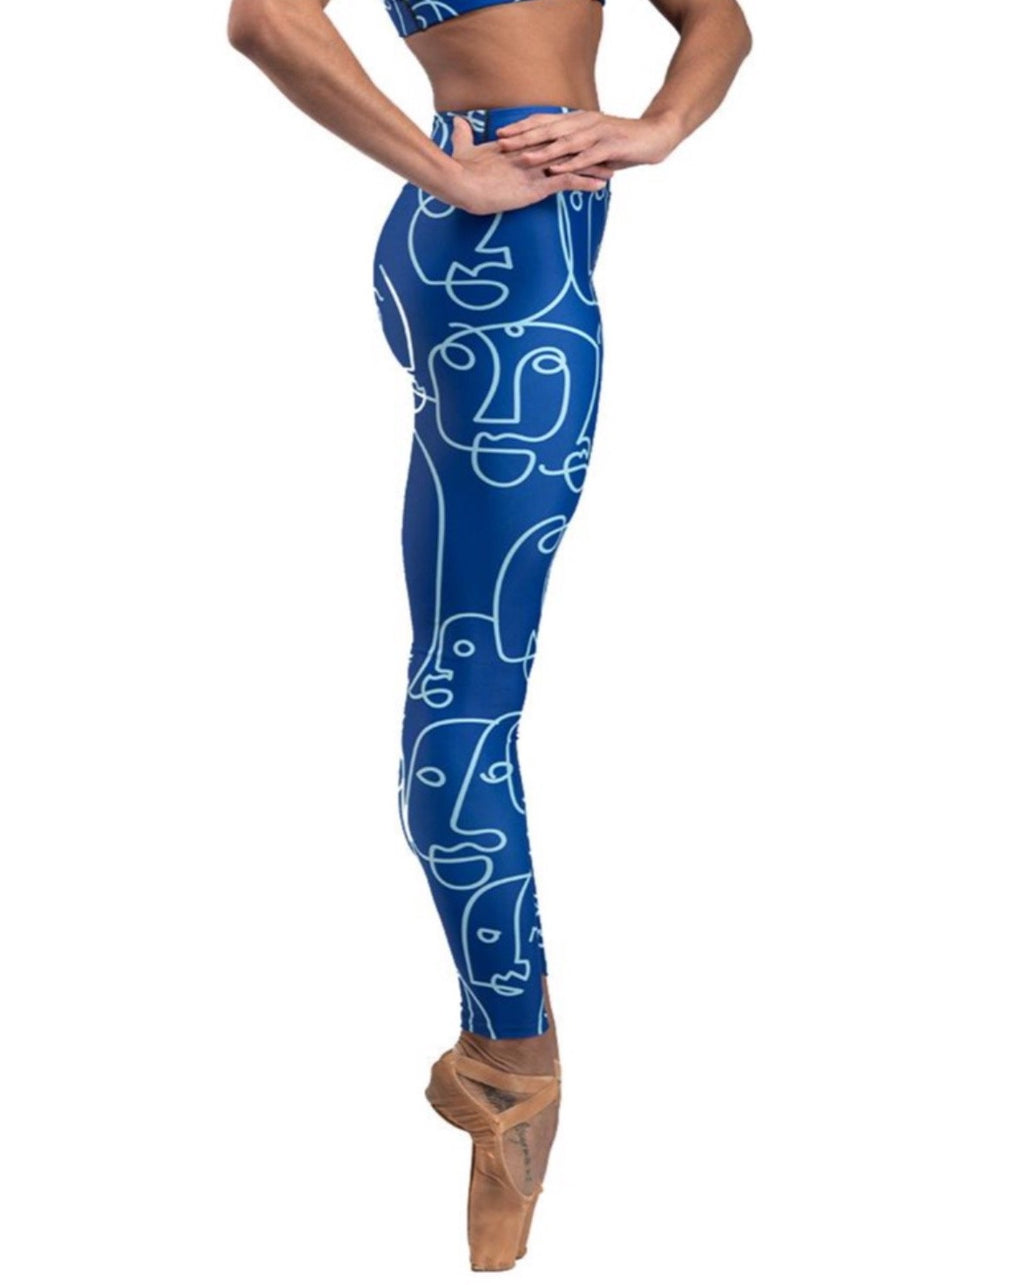 The cool ppl blue mazurka leggings with illustrated faces art modeled by a ballet dancer on pointe.